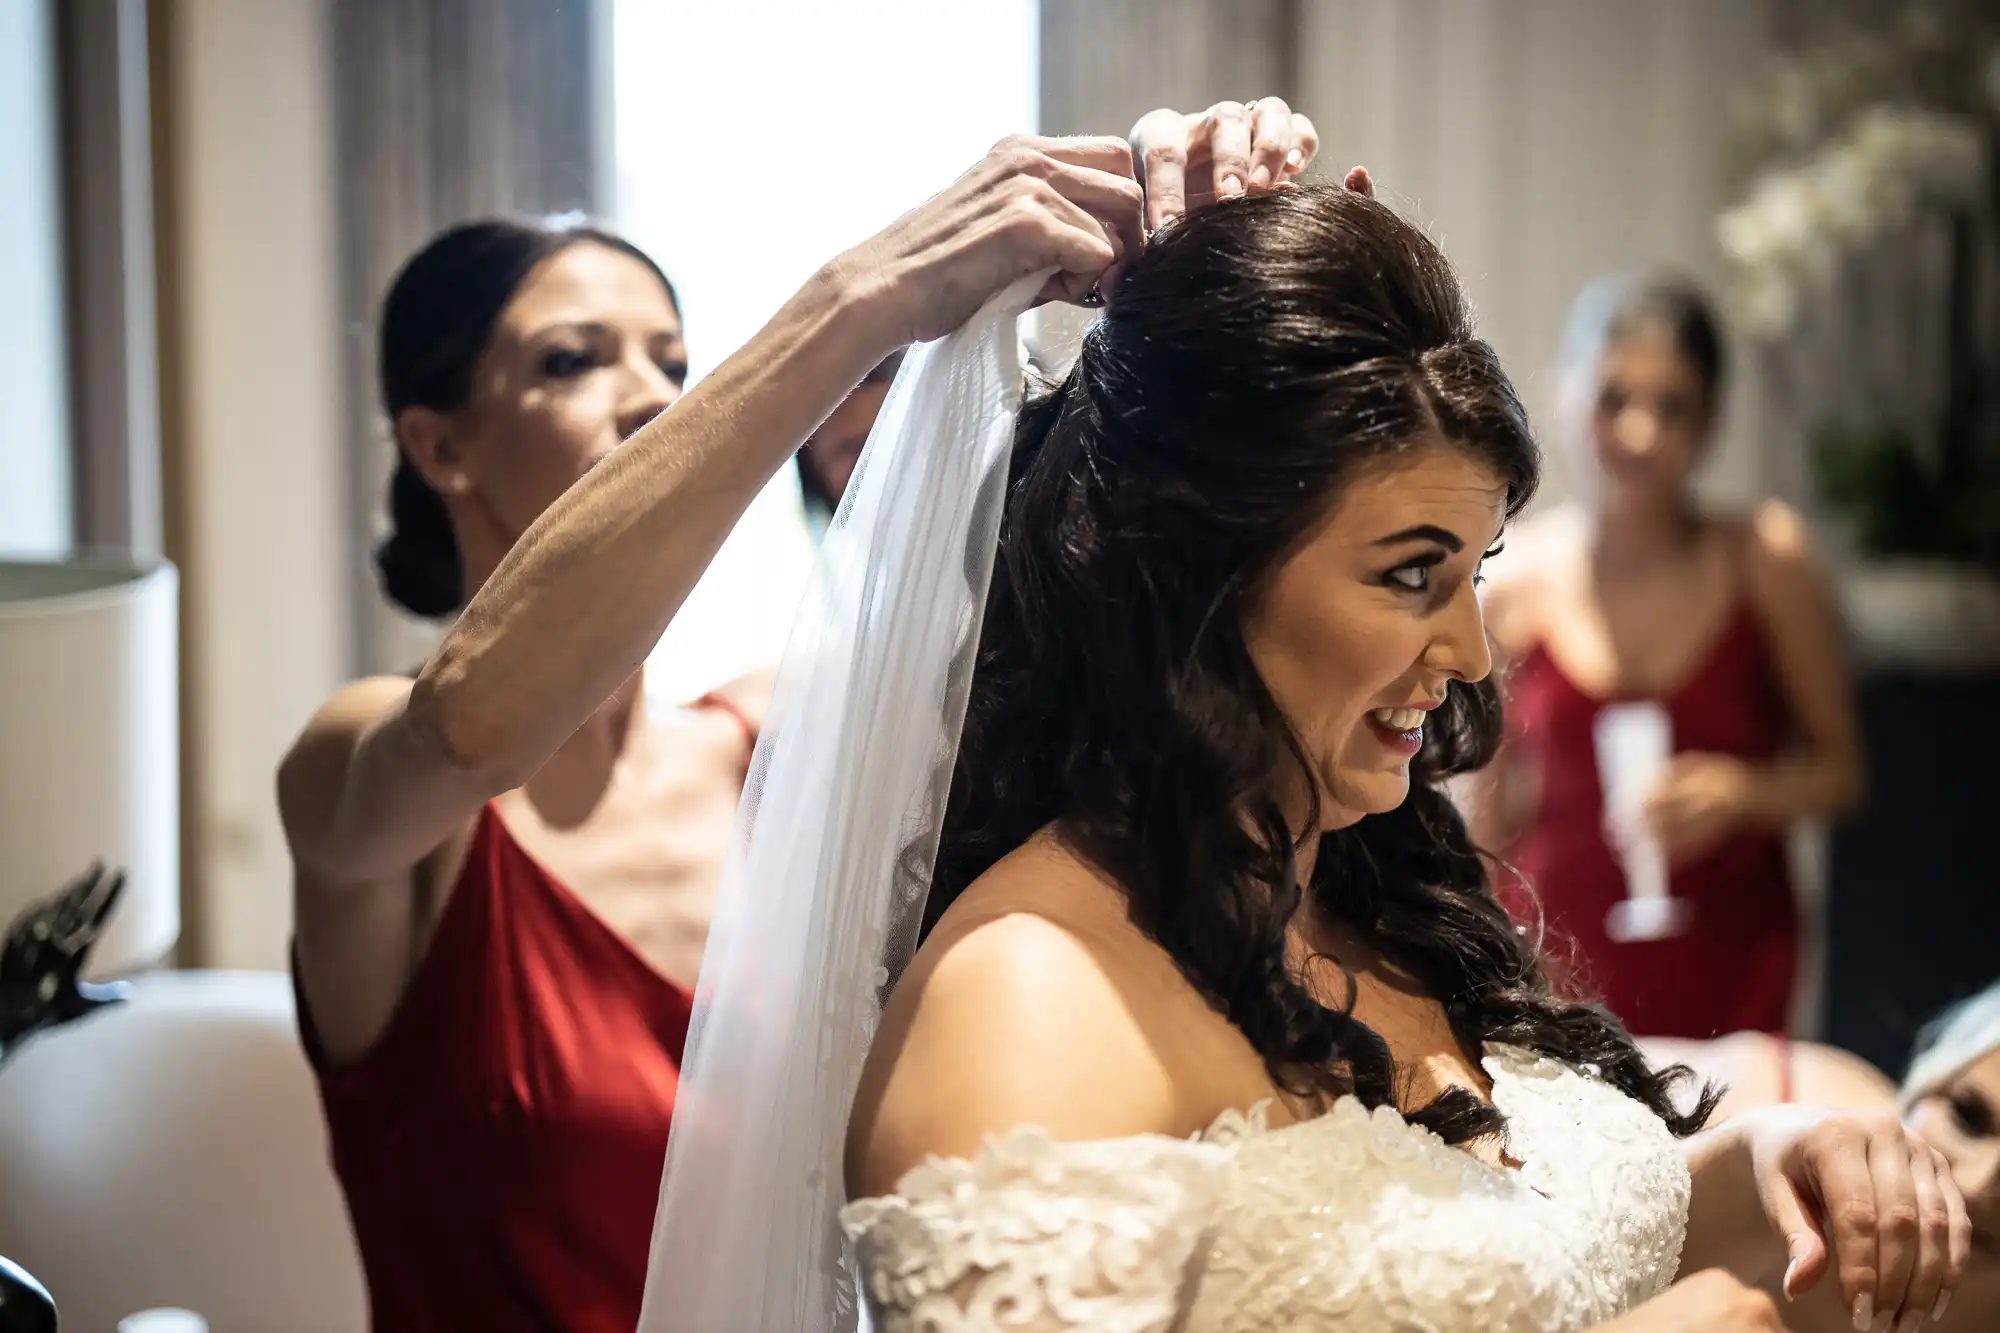 A woman in a white wedding dress has her veil adjusted by another woman in a red dress. Other women in red dresses are in the background.